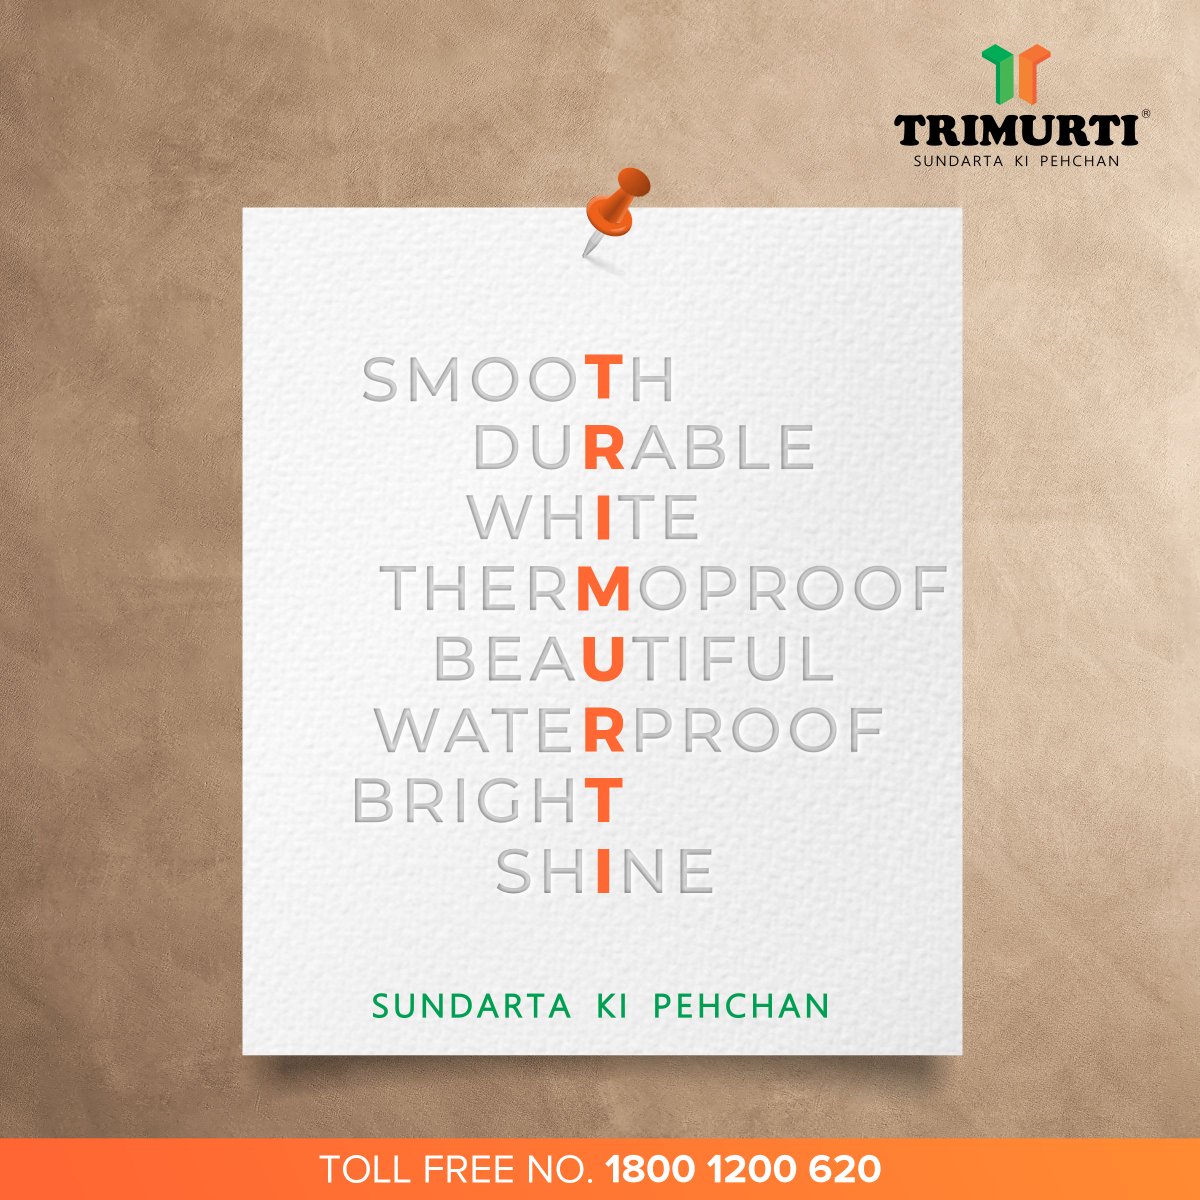 All these good things and so much more for your walls, with Trimurti Wallcare Products.
.
.
.
#Trimurti #TrimurtiWallcareProducts #TrimurtiBrandPost #SundartaKiPehchaan #BeautifulWalls